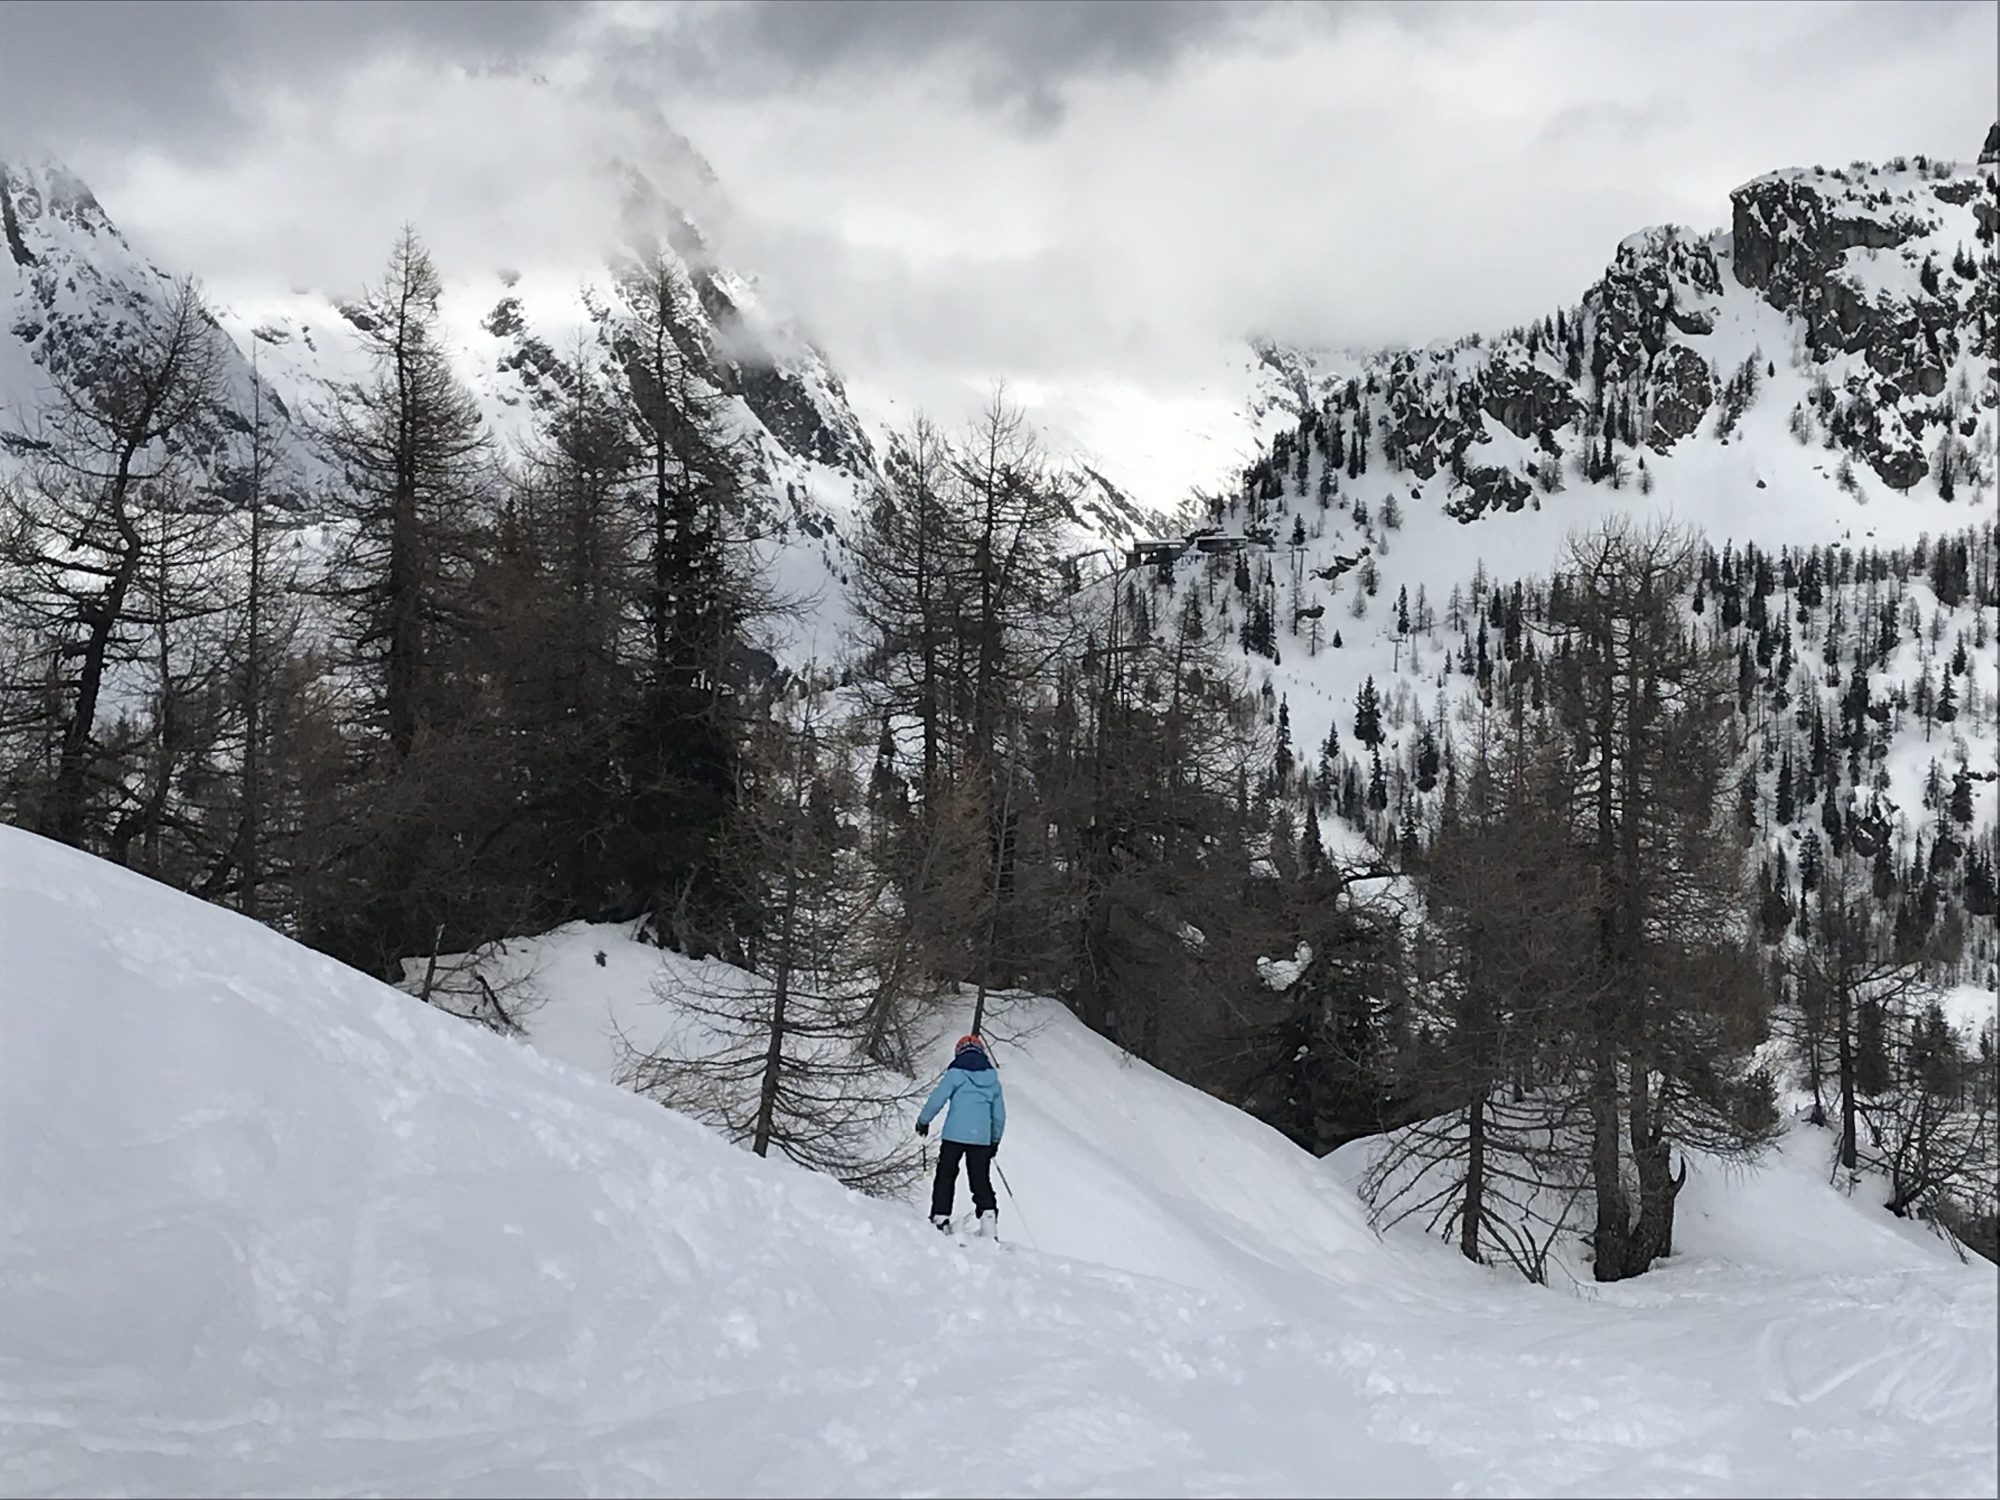 Courmayeur - Skiing to lunch at Maison Vielle. The Amazing Ski Area of Courmayeur